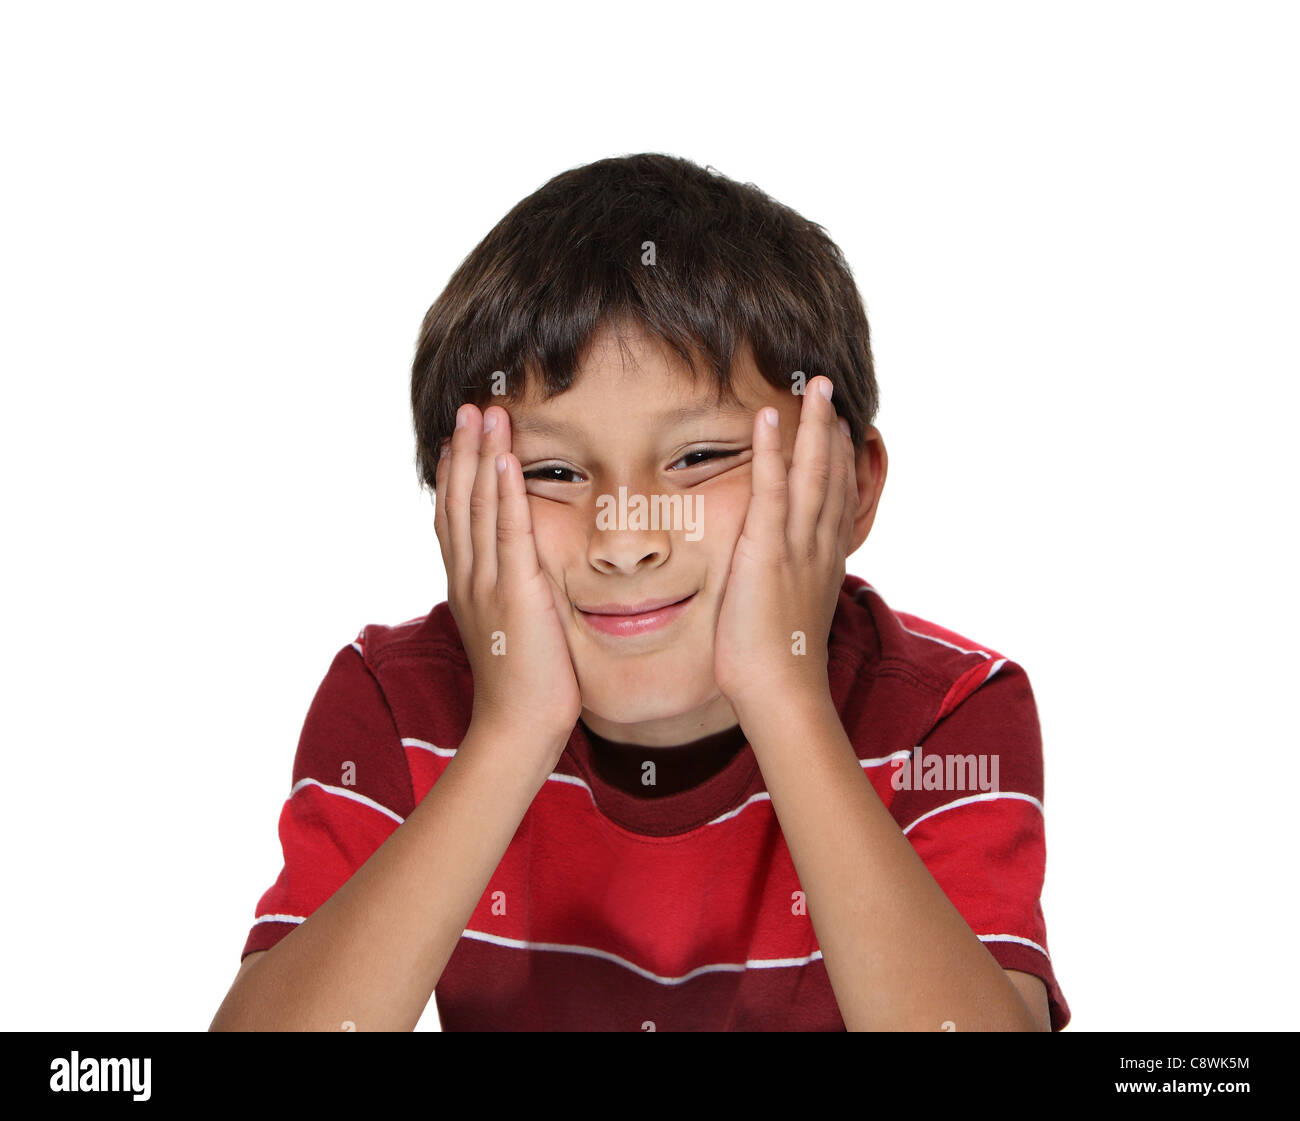 Ennuyer ou hispanique Hispanic boy with head in hands on white background Banque D'Images